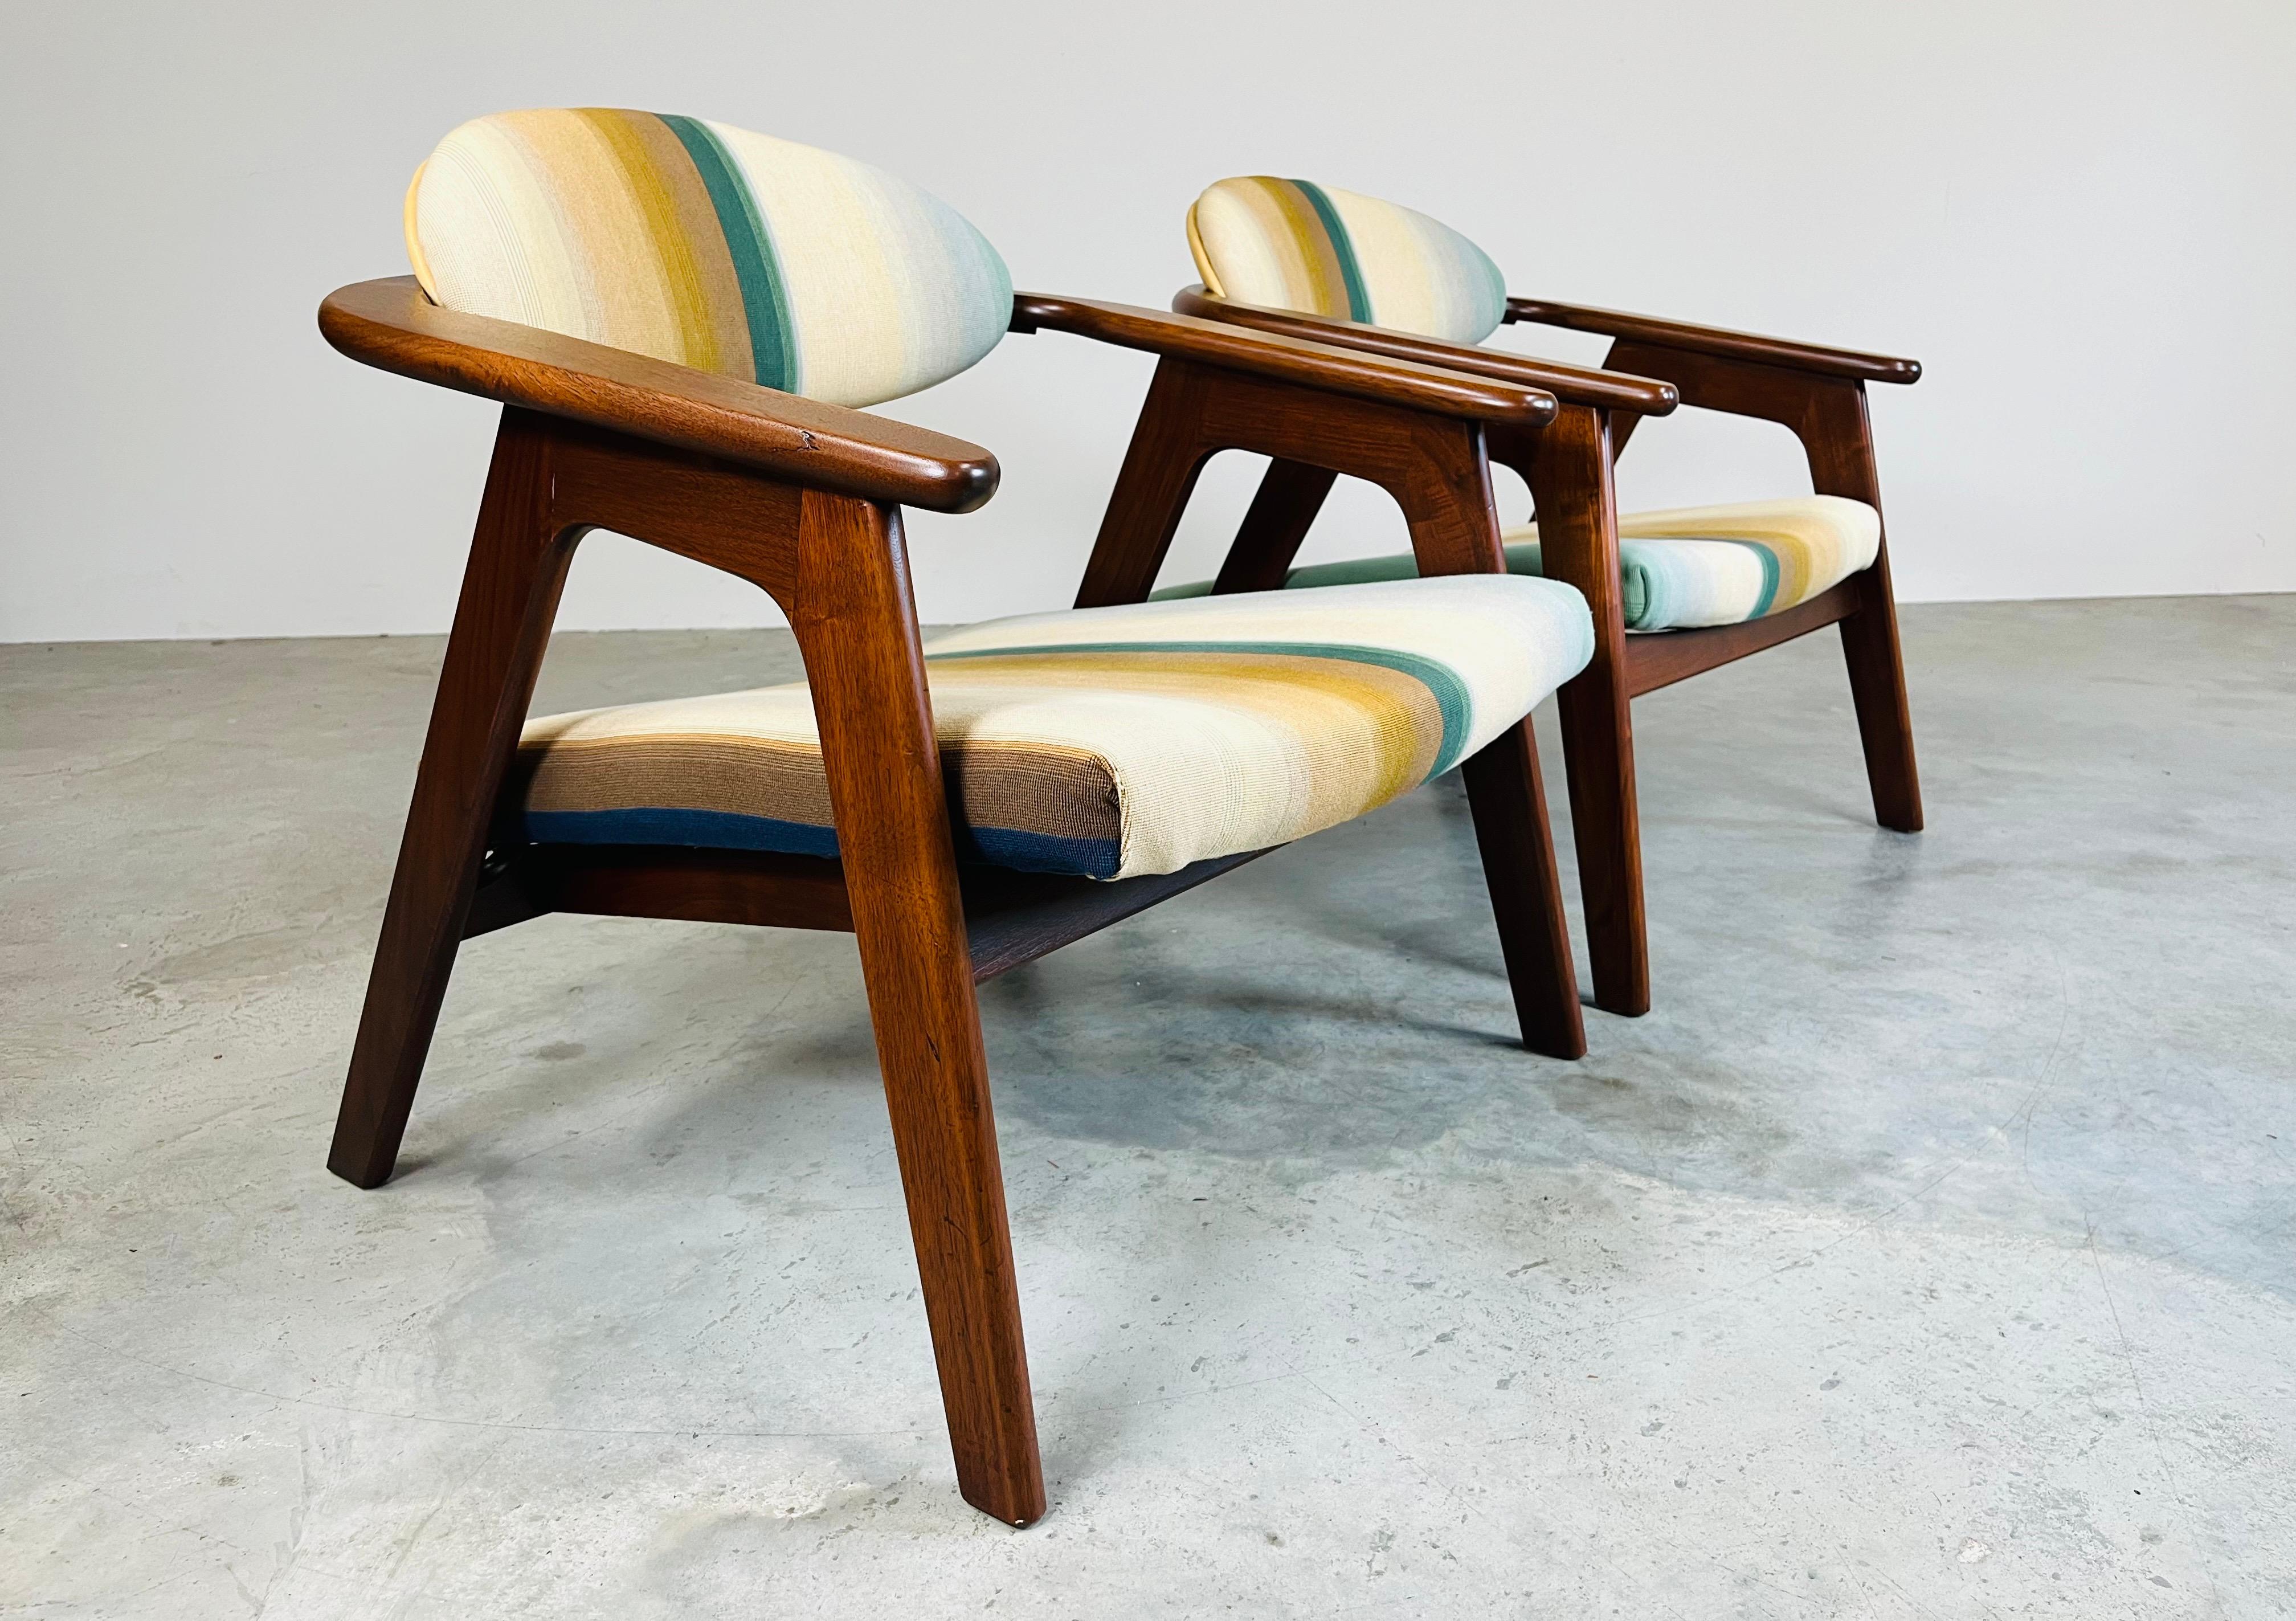 A sculptural pair of ‘Captains’ chairs Model #916-CC having walnut frames, striking Maharam's Paul Smith epingle stripe upholstery with vegetable dyed aniline leather backs designed by Adrian Pearsall for Craft Associates.
North America ca 1960.
In